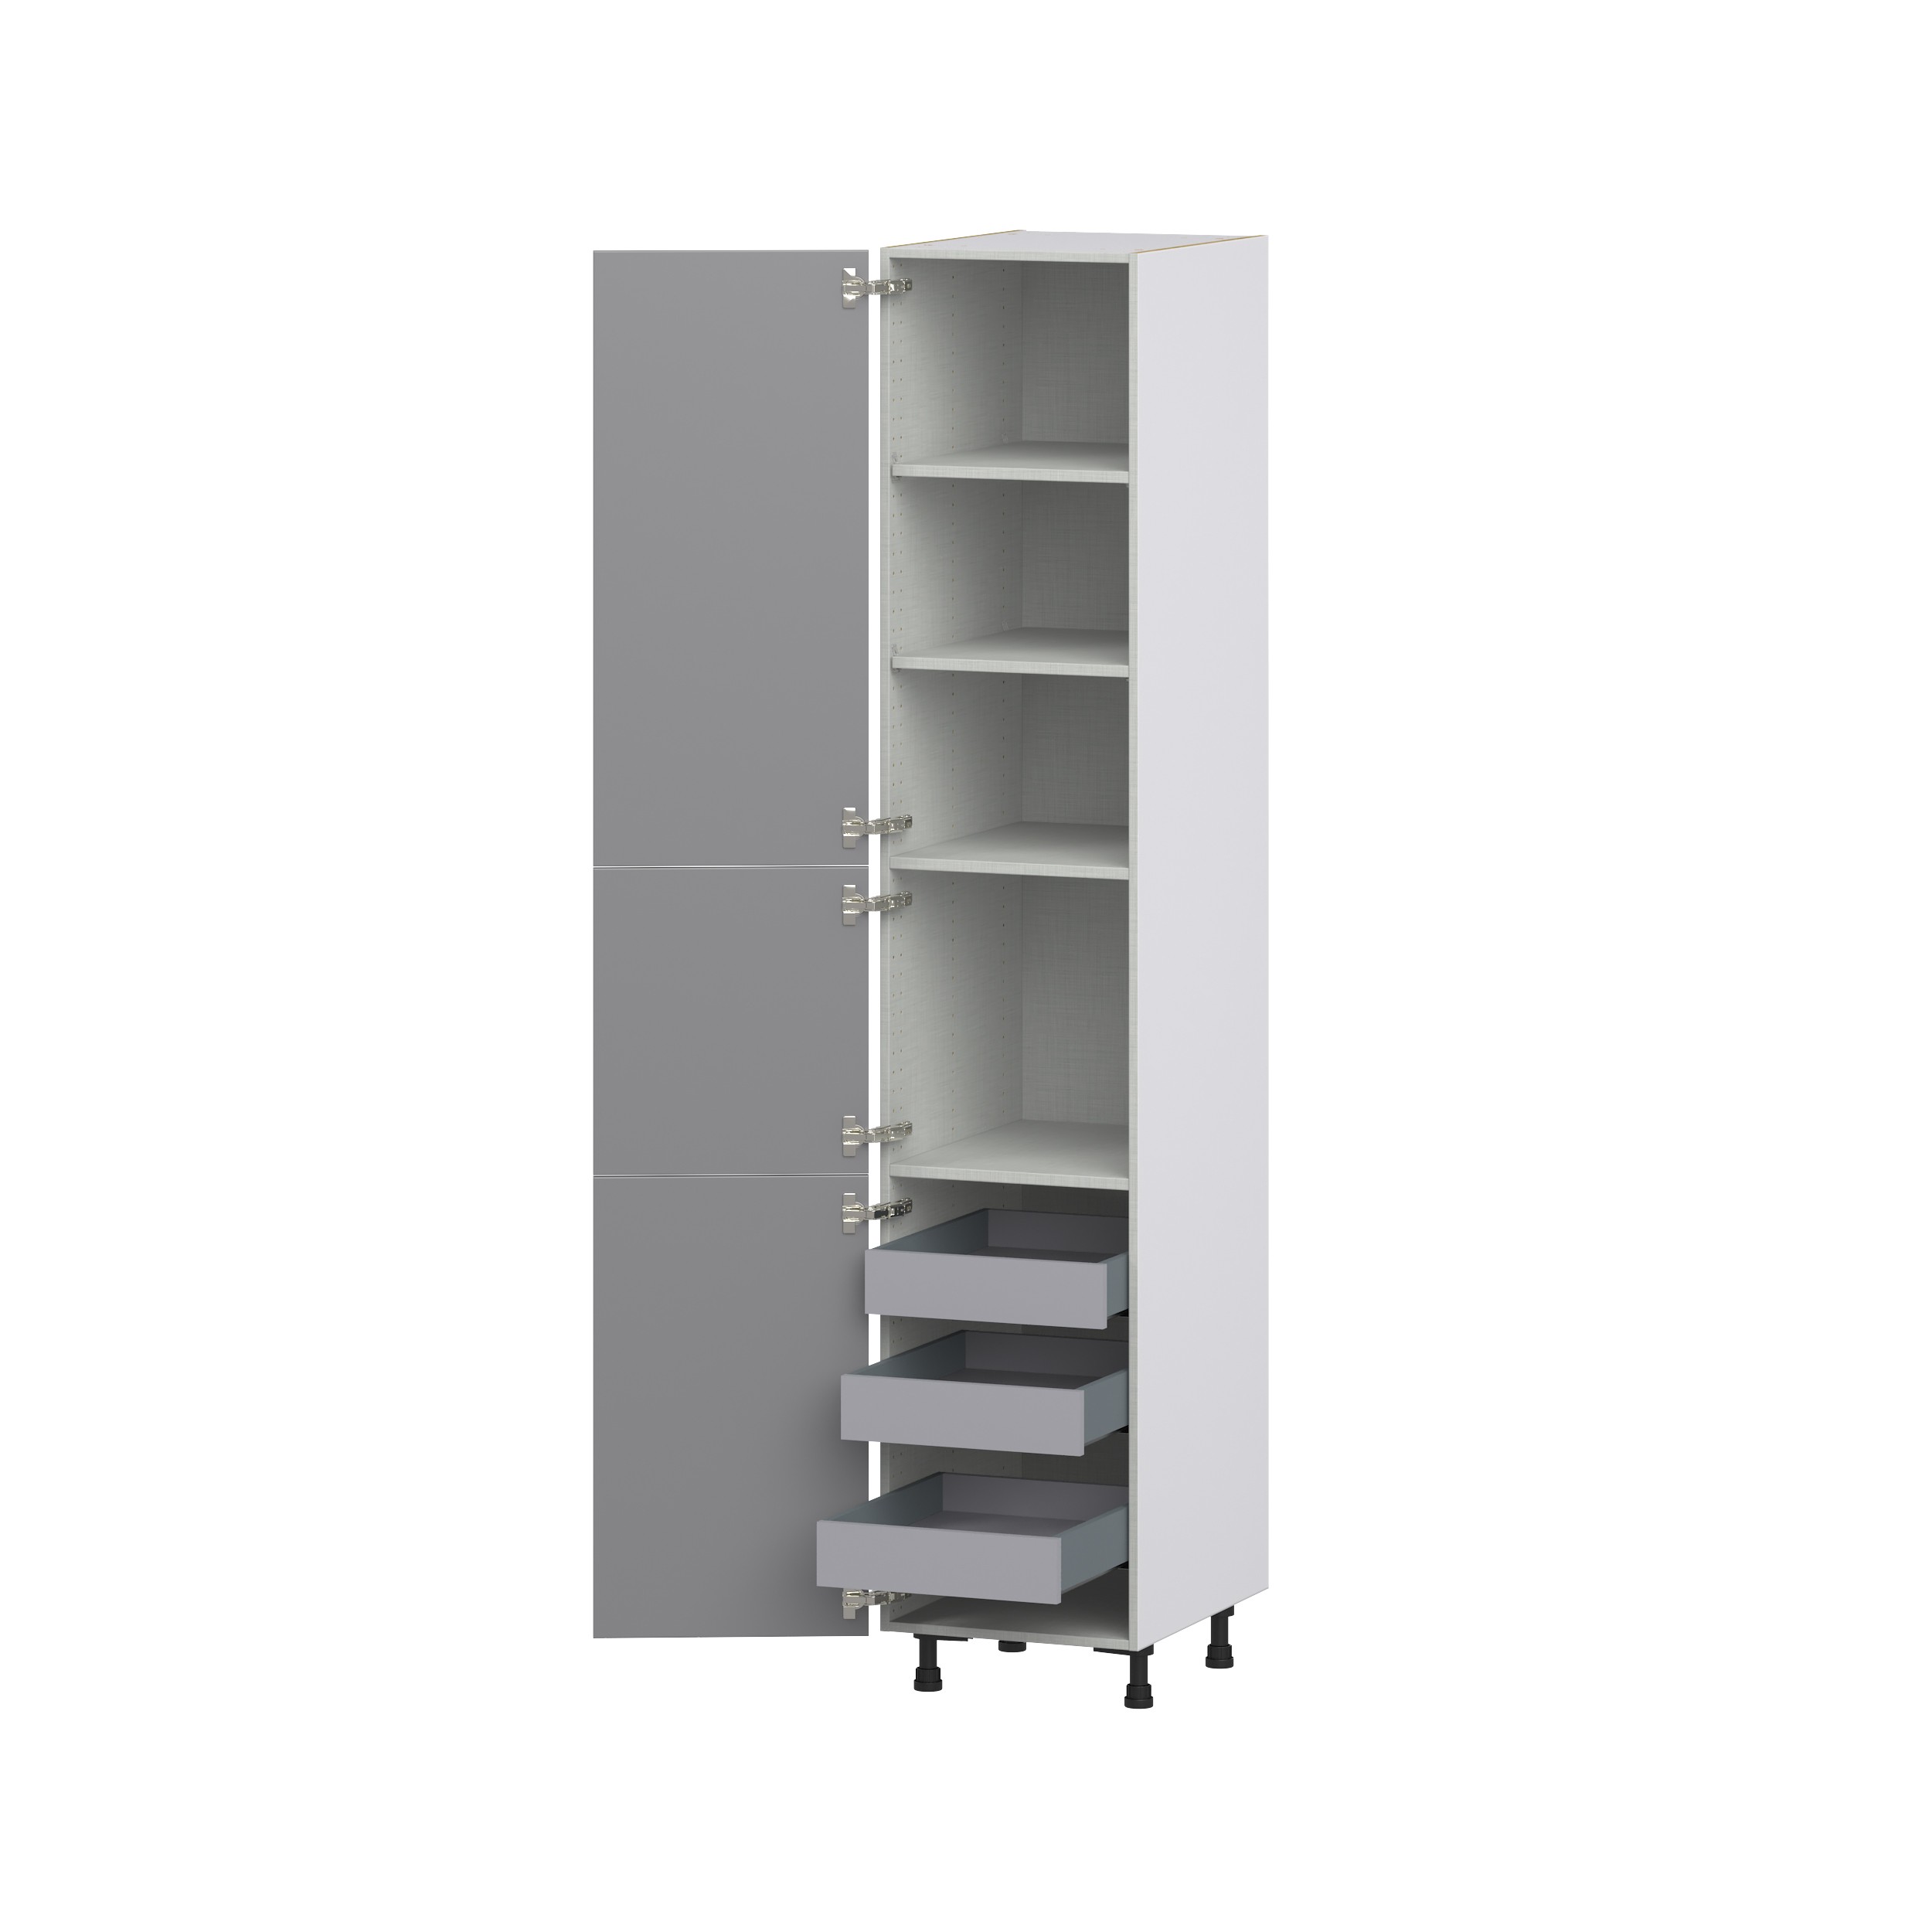 Willow Painted Slate Gray Shaker Assembled Pantry Cabinet with 2 Doors and 3 Inner Drawers (18 in. W X 94.5 in. H X 24 in. D)